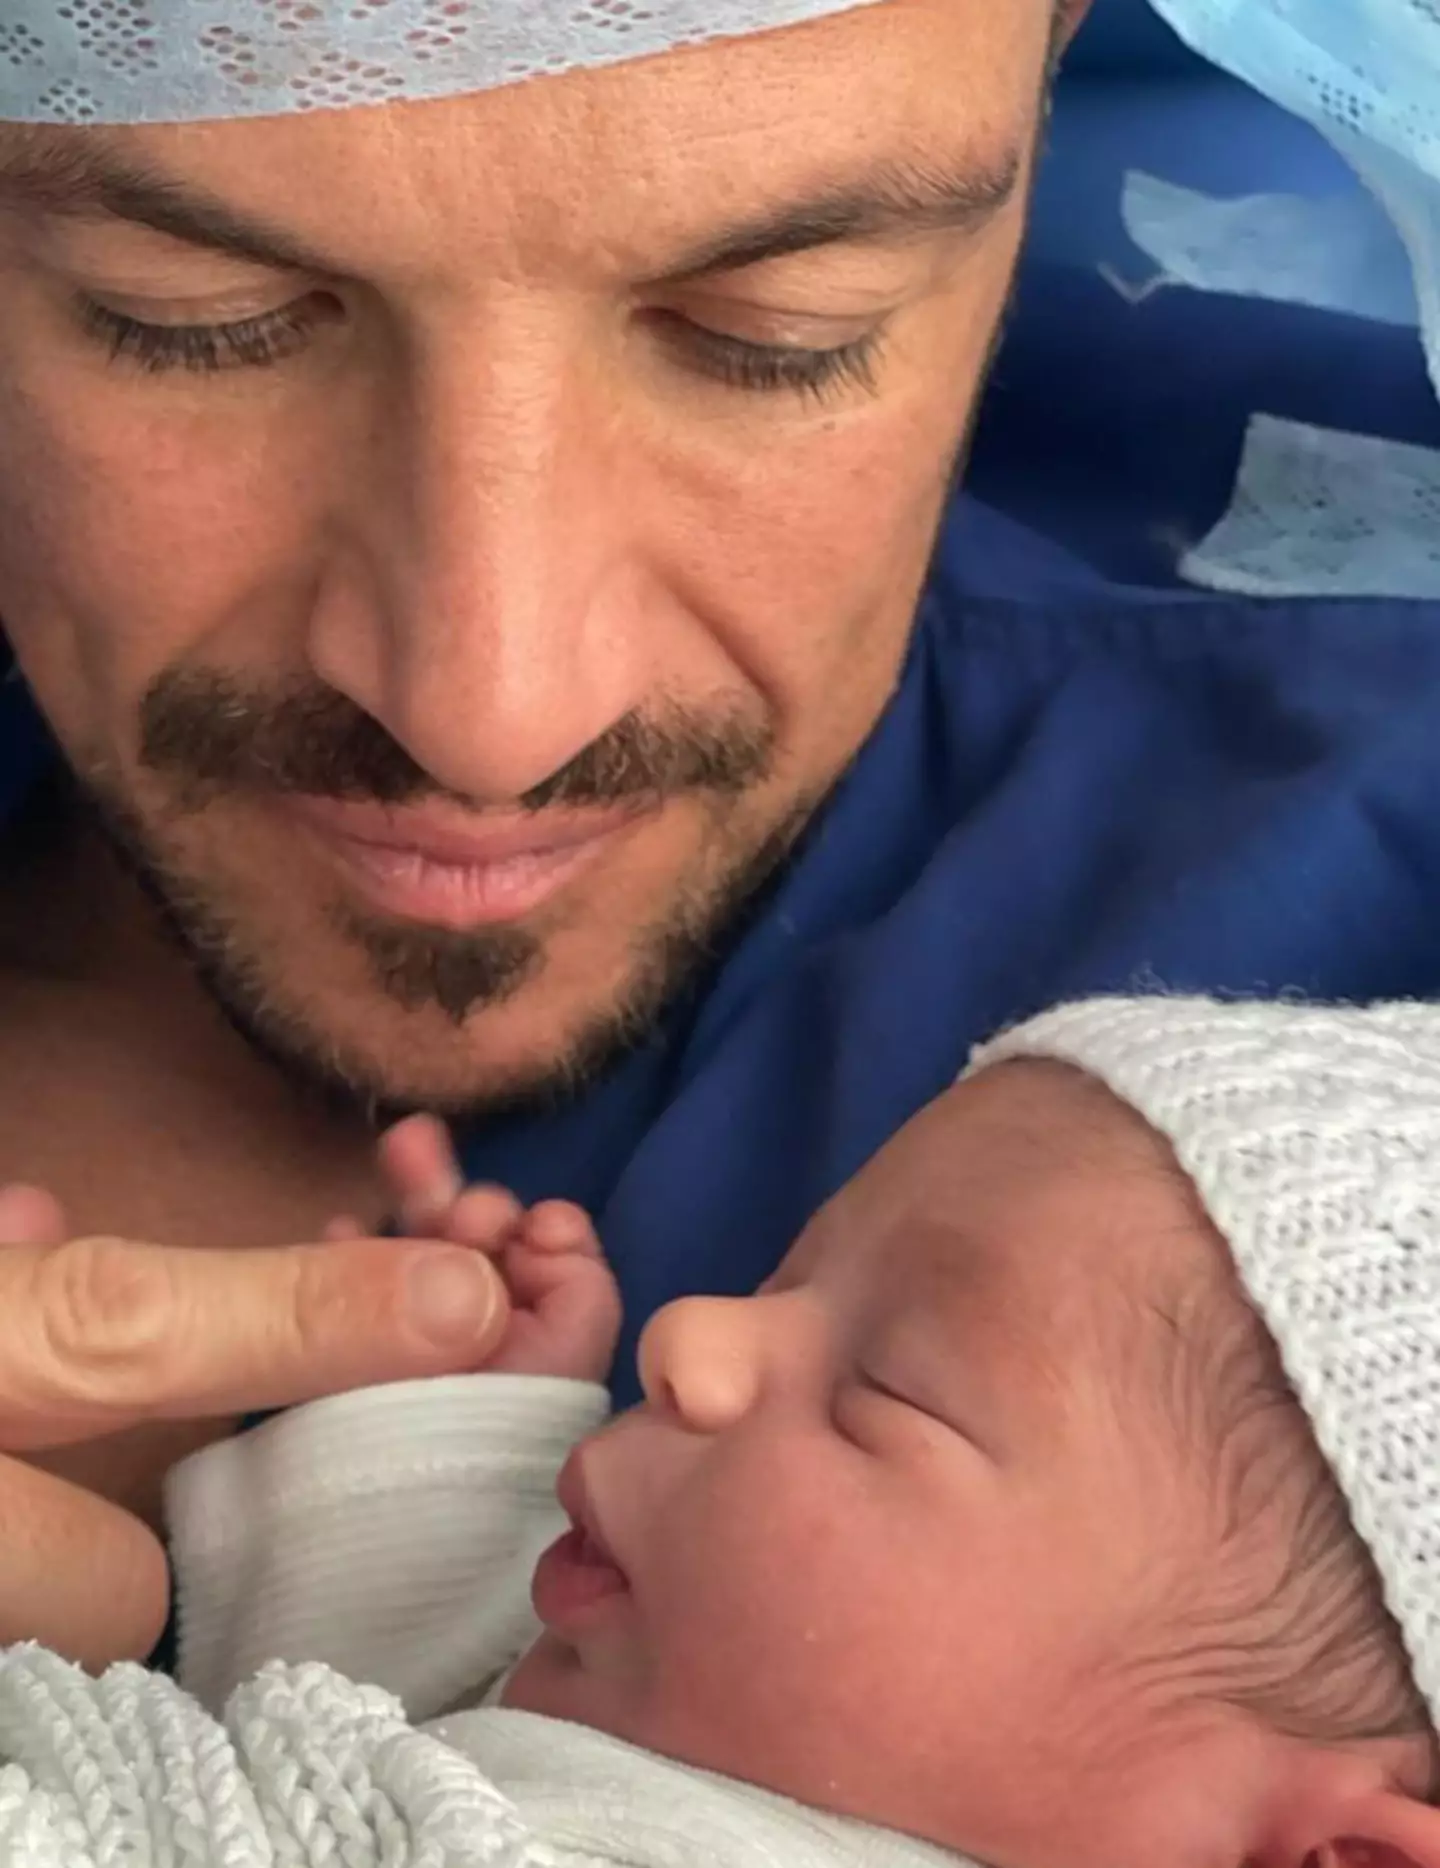 Peter Andre welcomed the birth of his daughter earlier this month (2 April) (Instagram/@peterandre)